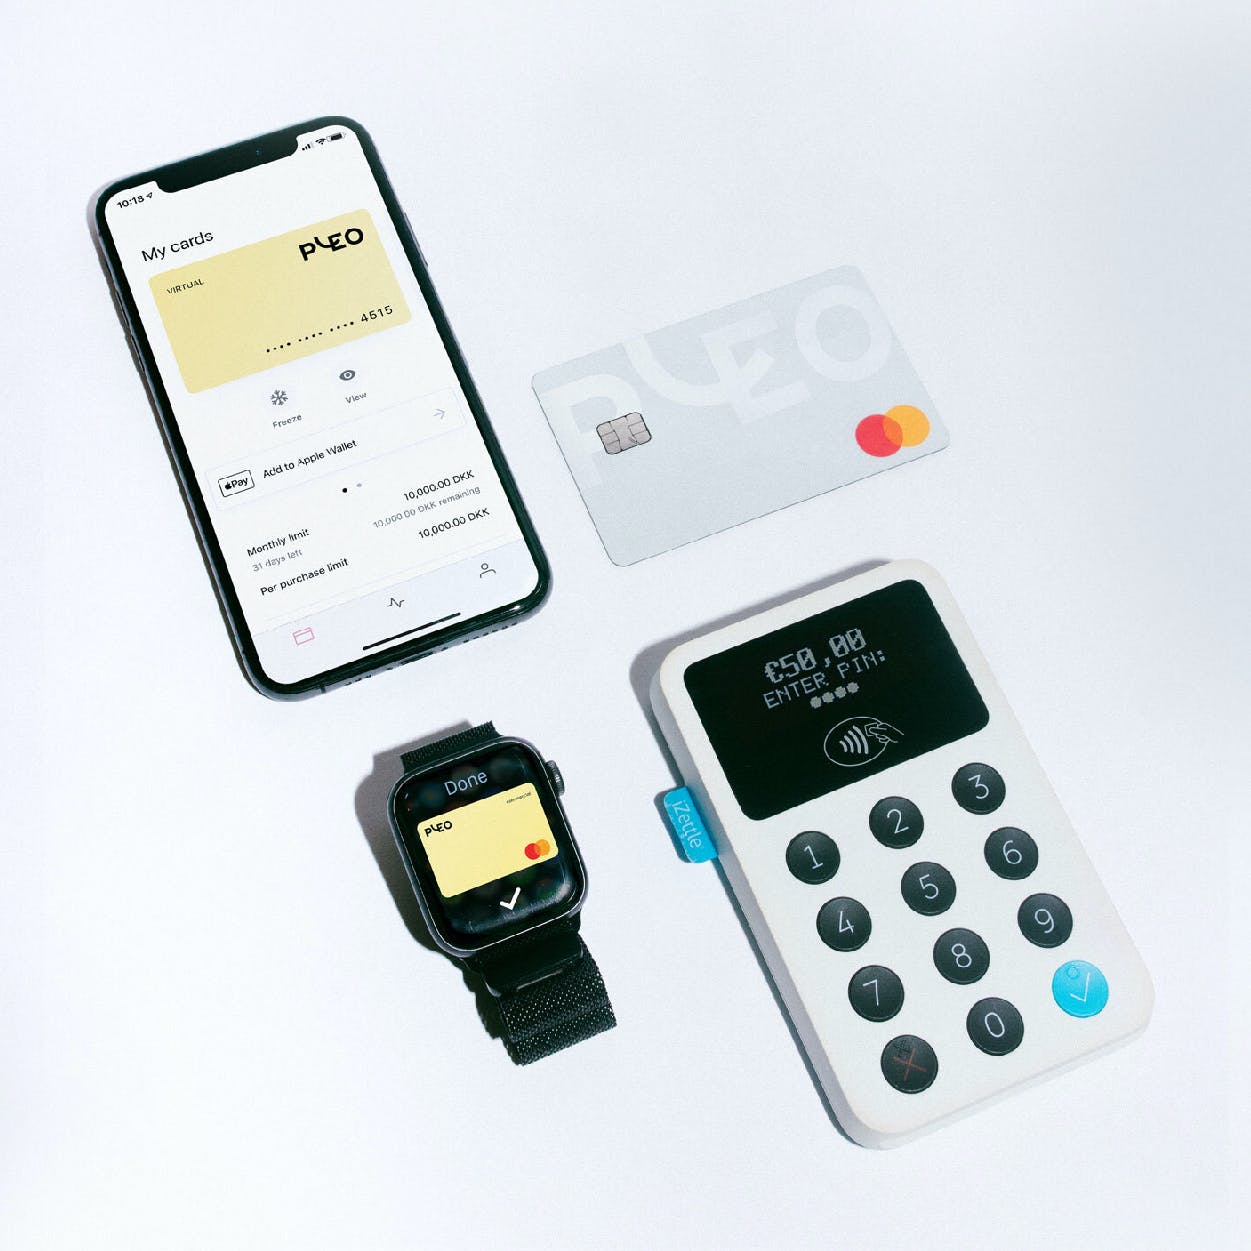 Pleo's virtual and physical expense cards for business